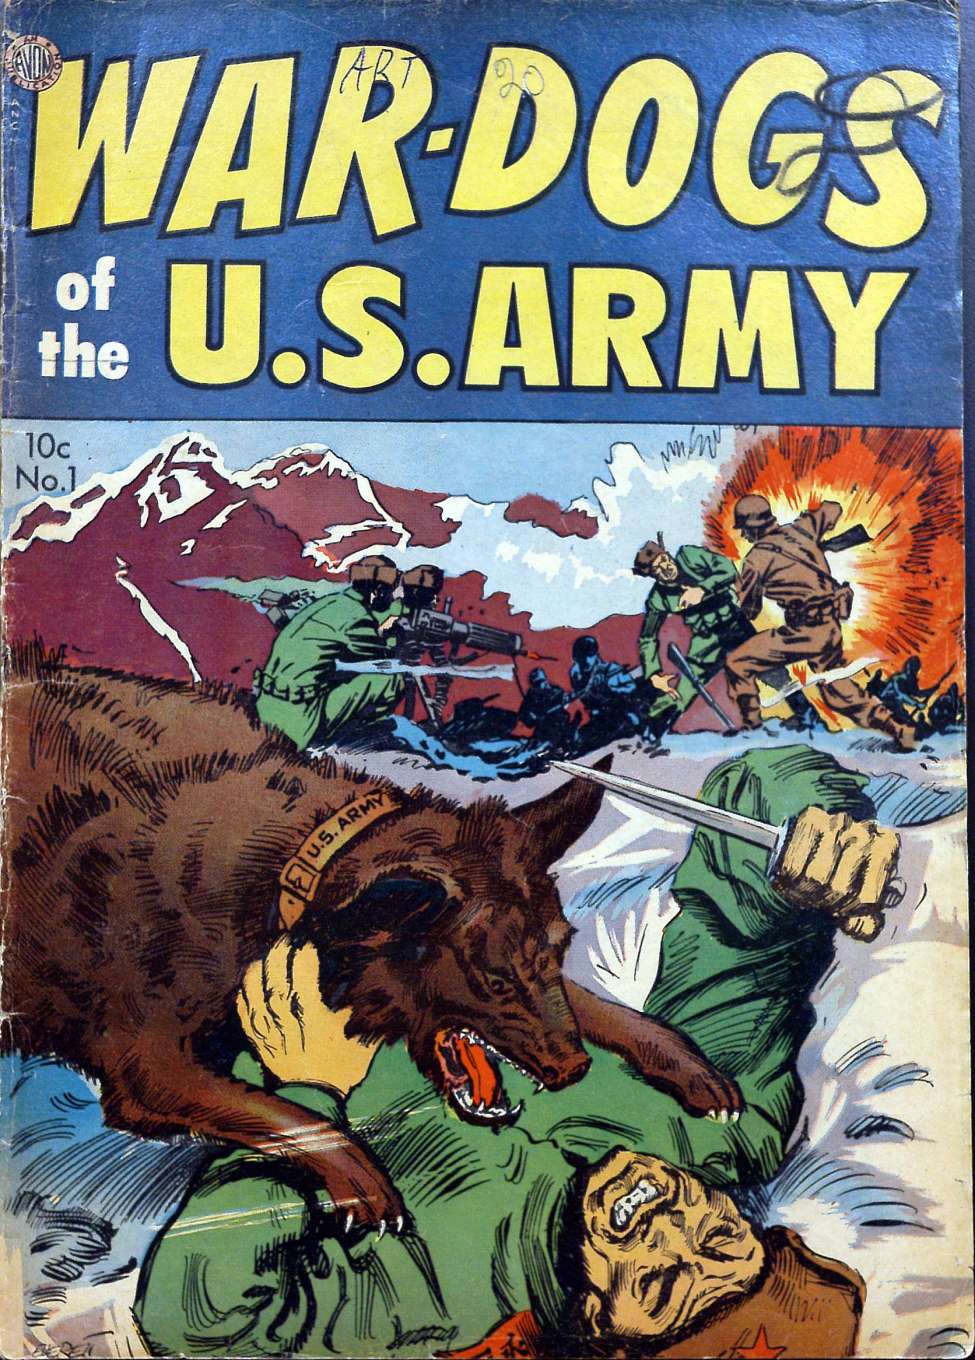 Comic Book Cover For War Dogs of the U.S. Army 1